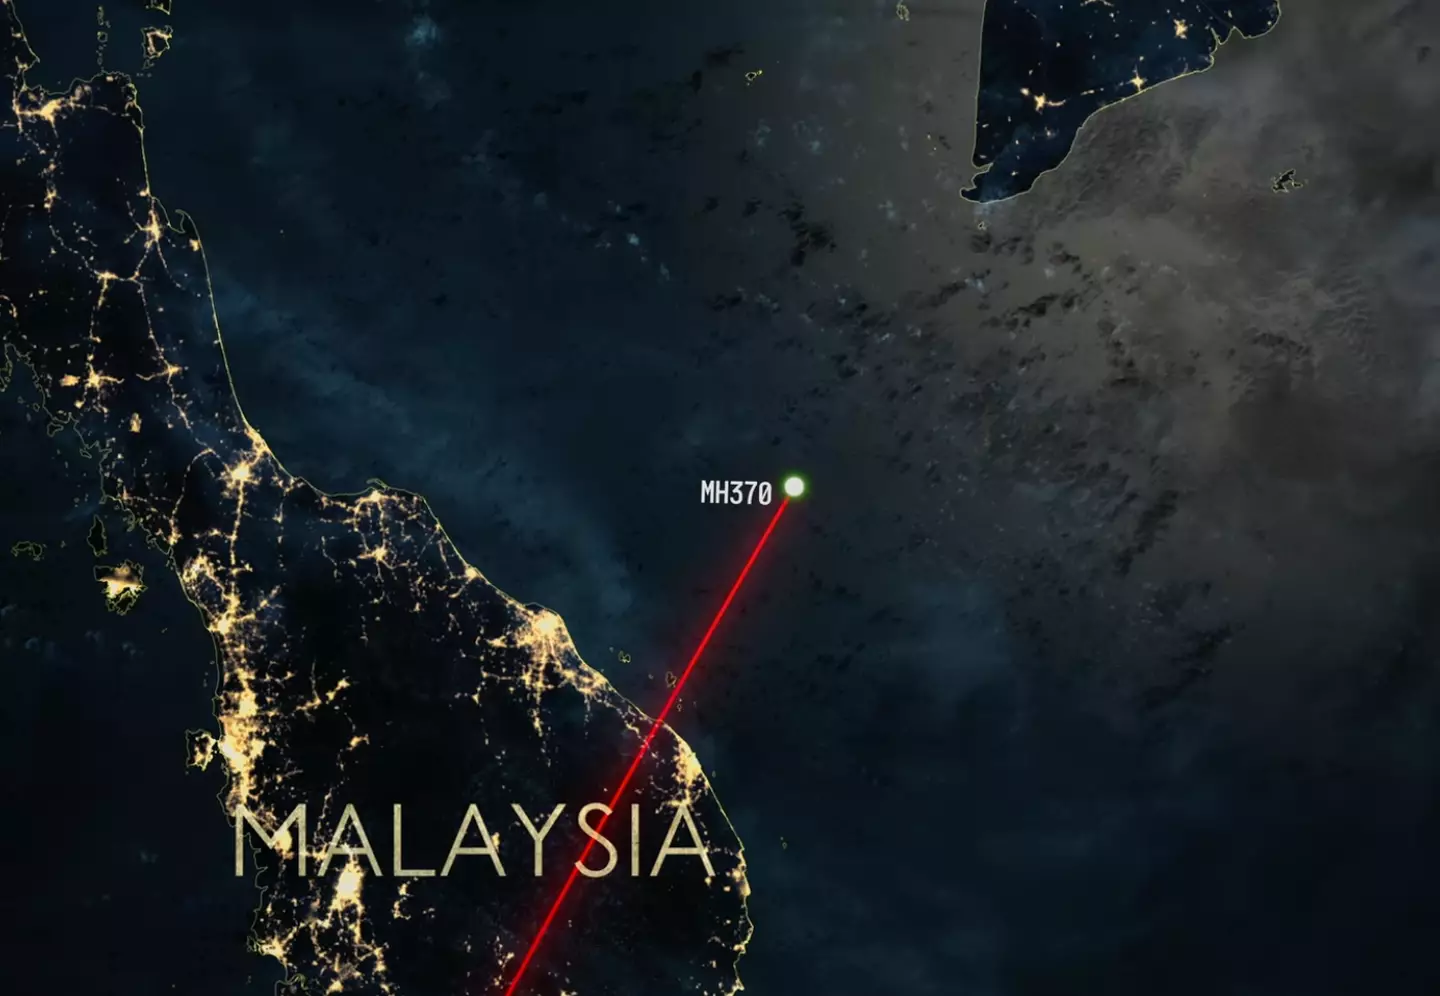 MH370: The Plane That Disappeared is available to stream now.